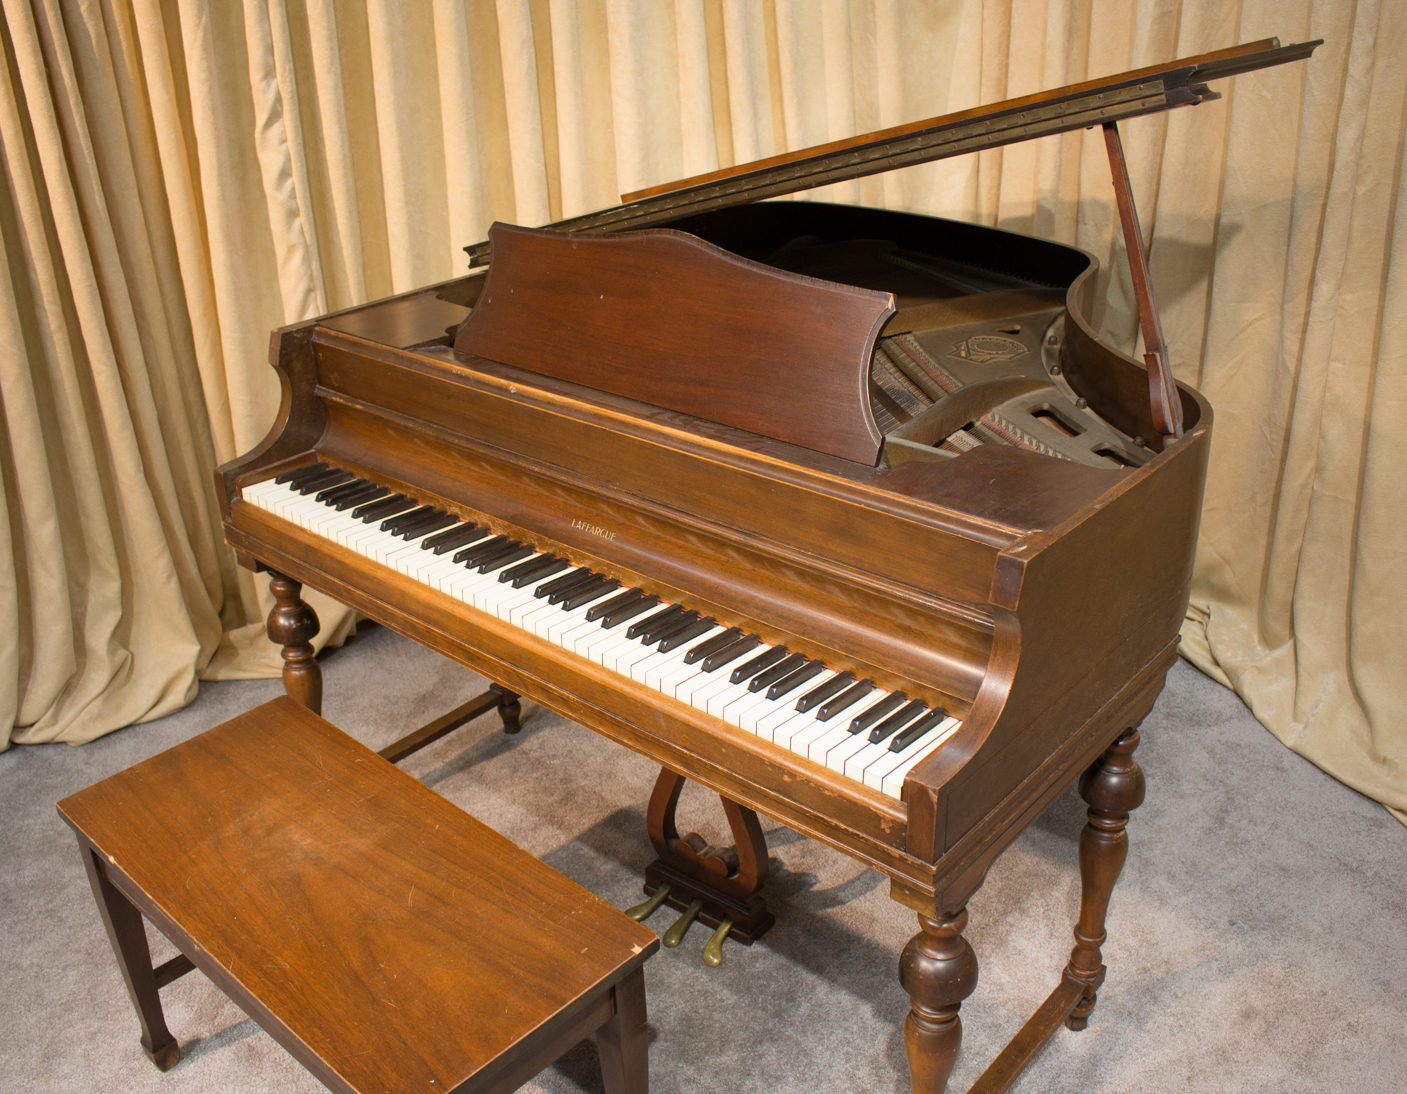 Unique Apartment Size Baby Grand Piano For Sale for rent